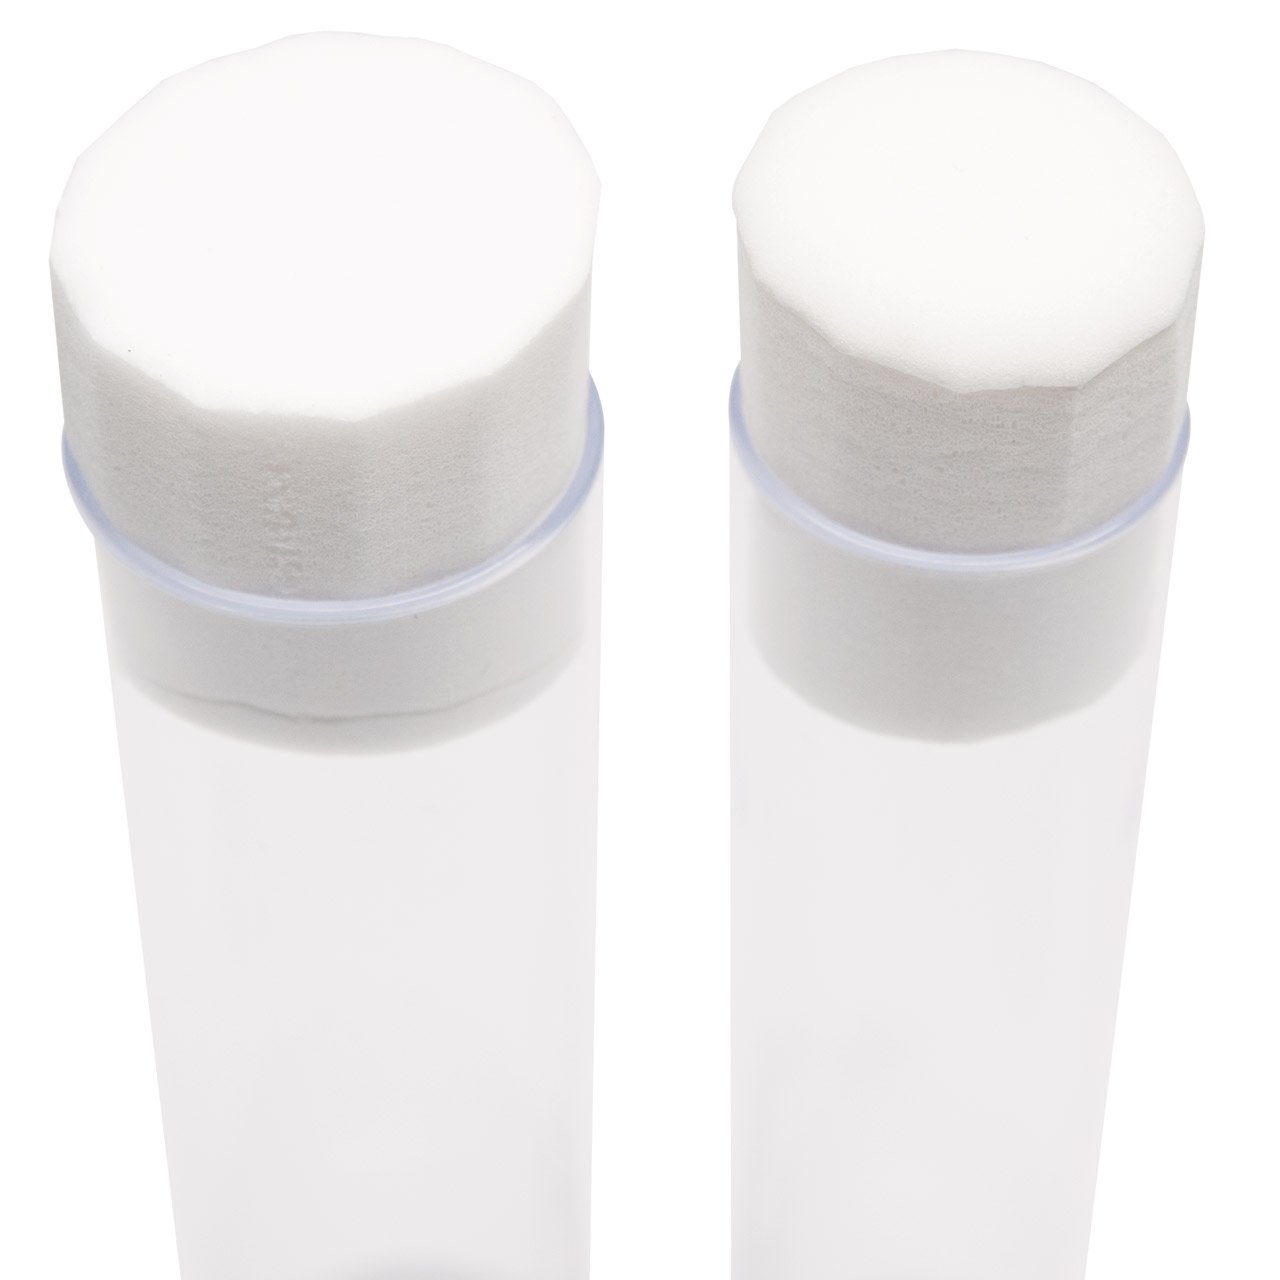 Droso-Plugs for Narrow Fly Vials (6760)